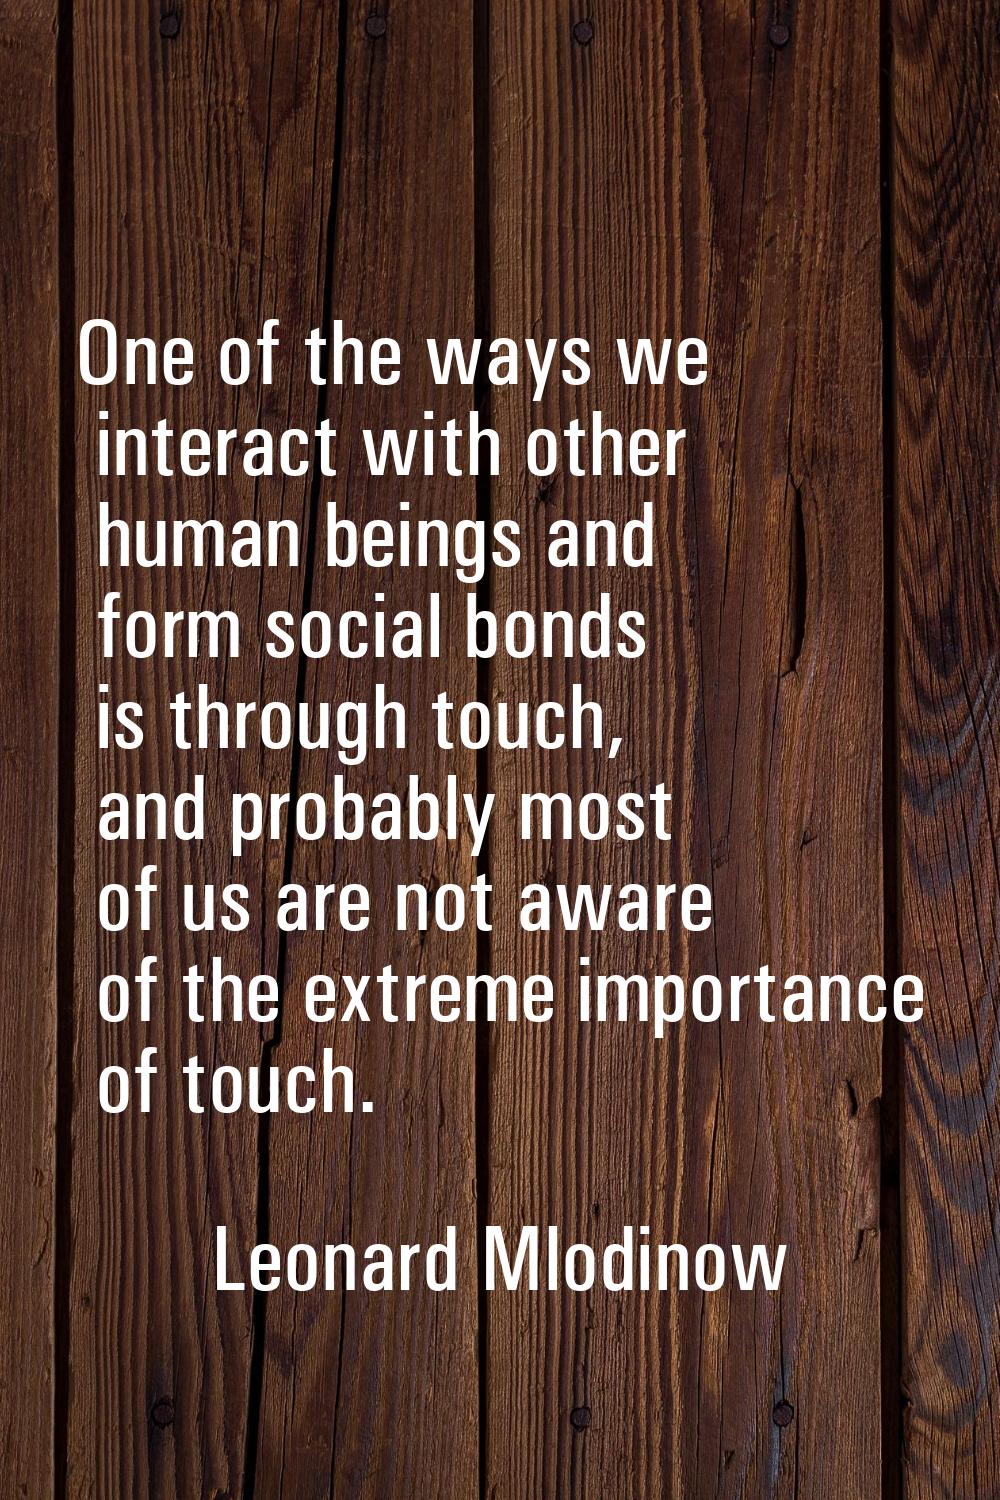 One of the ways we interact with other human beings and form social bonds is through touch, and pro